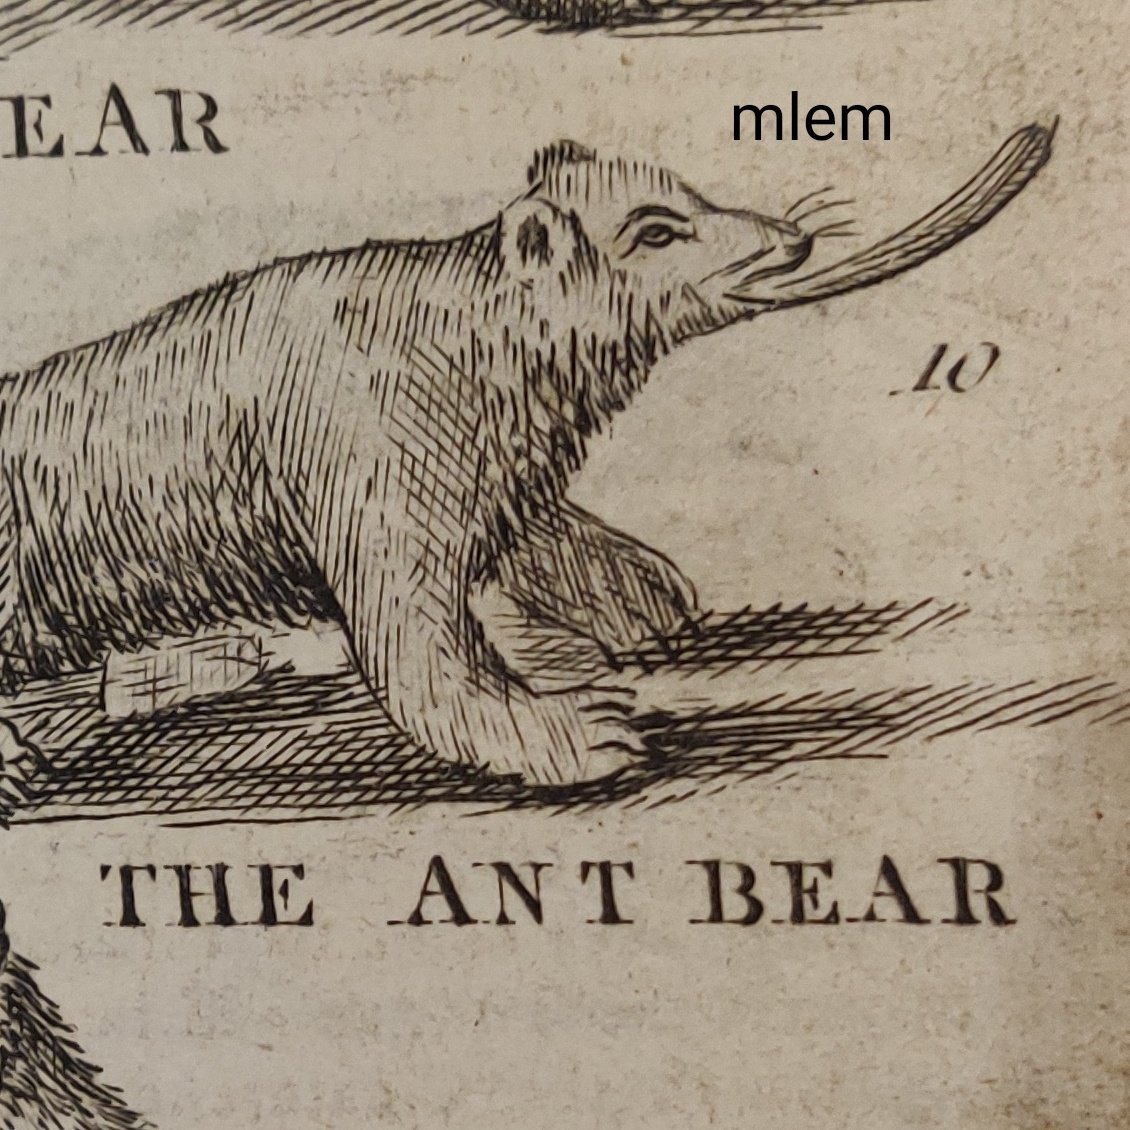 today, one of my favourite books which only comes by once every few years (like a badly drawn comet): the "Description of Three Hundred Animals", featuring the Ant Bear, which is "big as a pretty large dog"